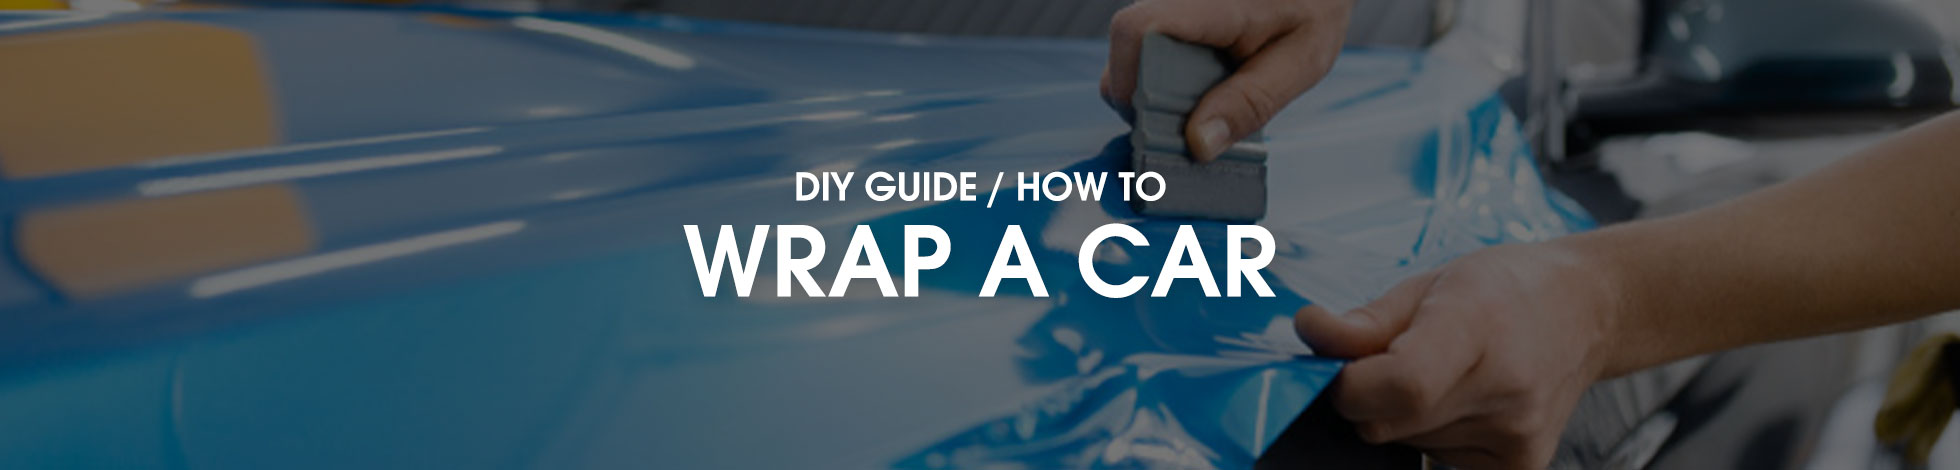 DIY Guide on How to Wrap A Car